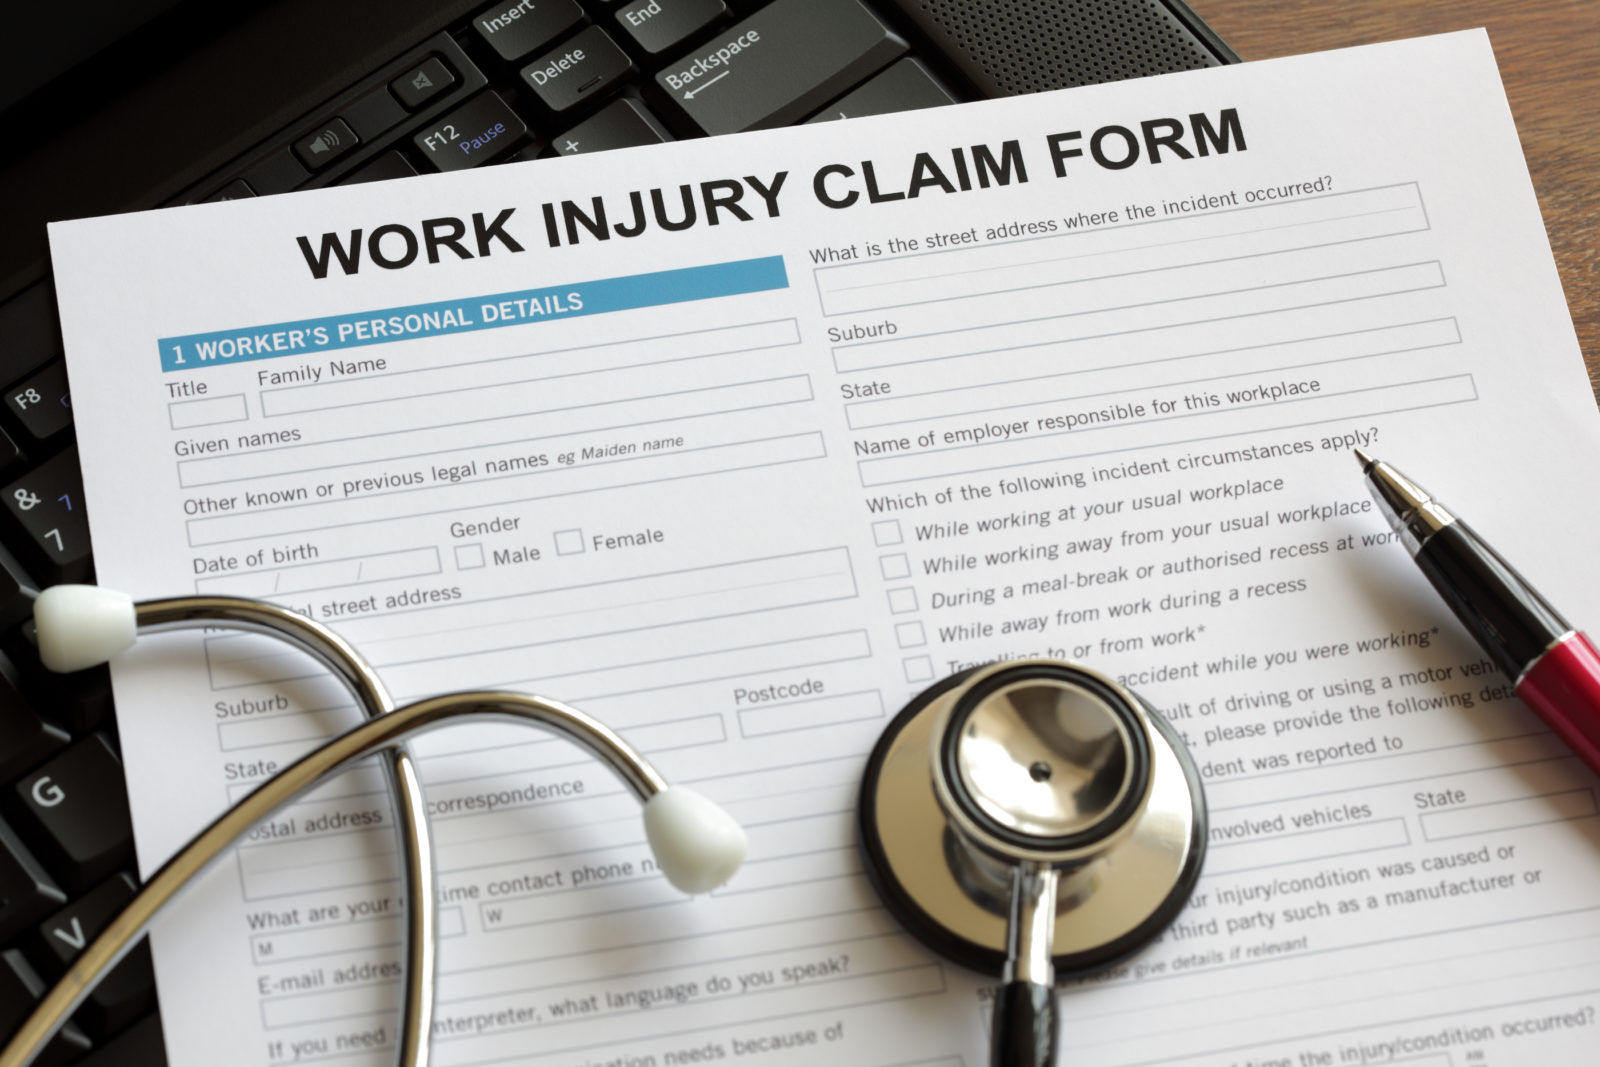 Workers Comp Form - Workers Compensation in St Paul Minnesota - Sand Law LLC